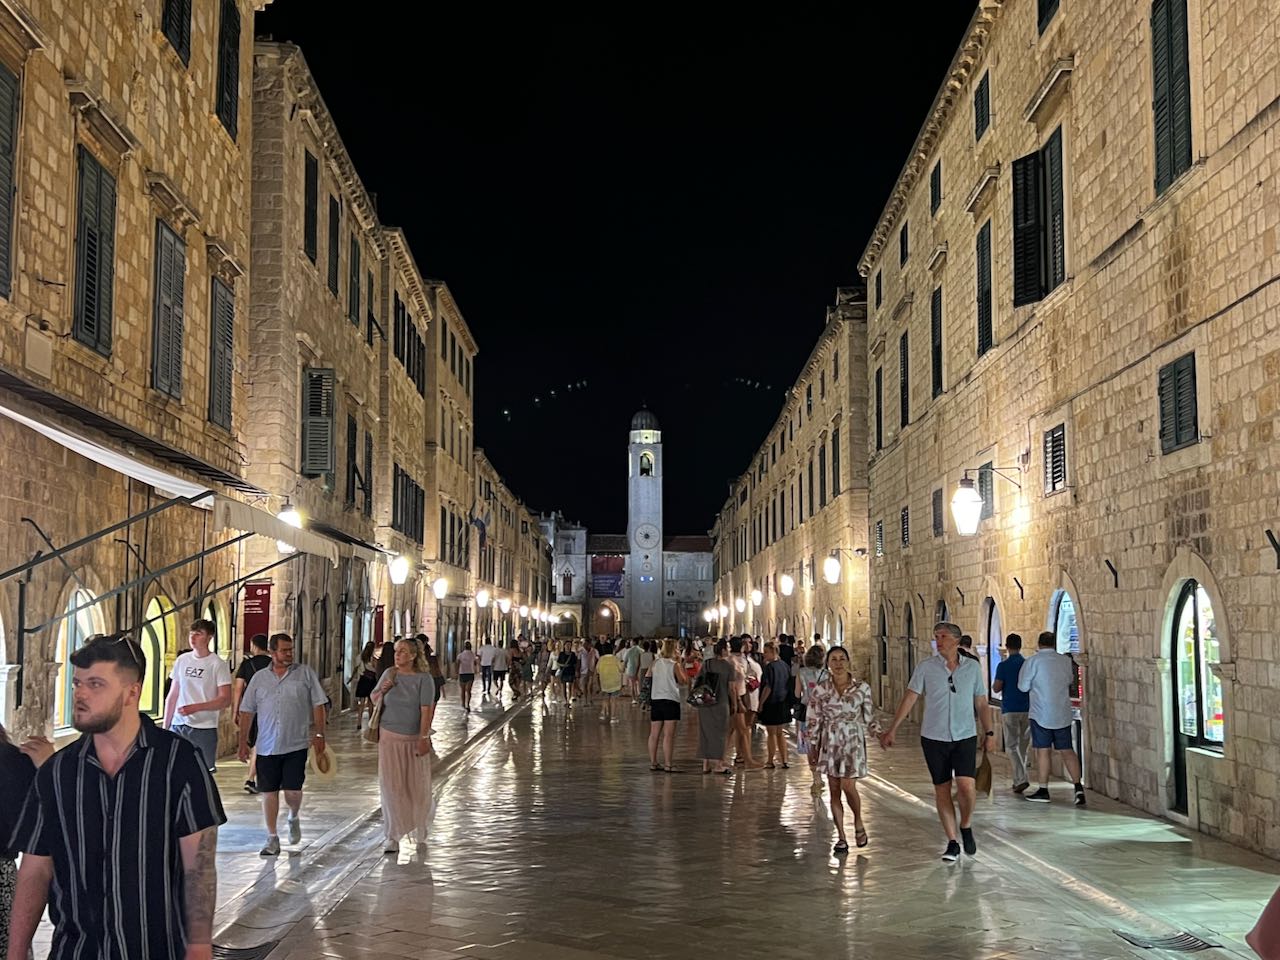 View down the main street at night in the old city of Dubrovnik